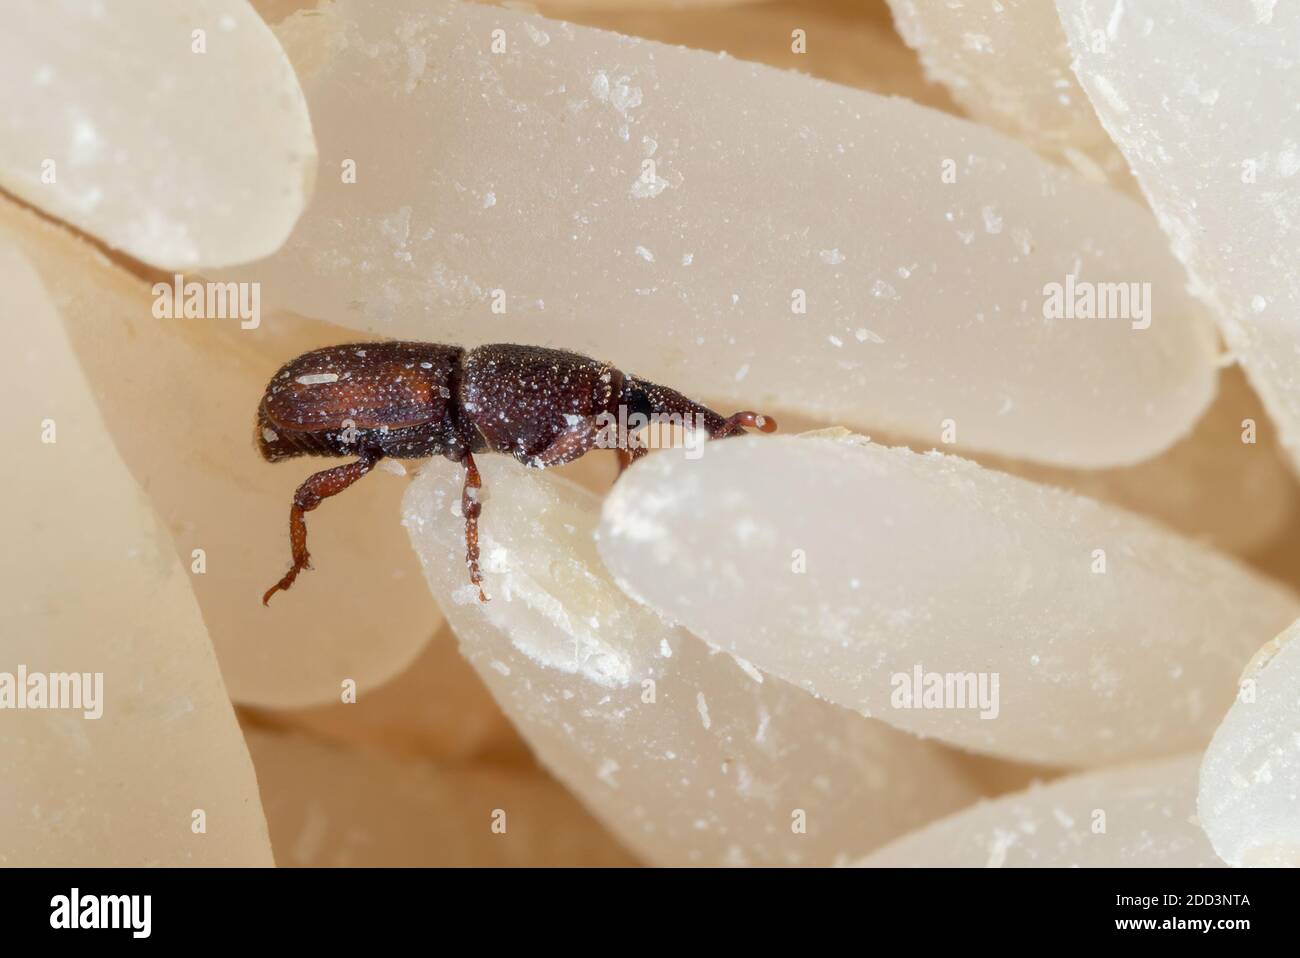 Macro Photography of Rice Weevil or Sitophilus Oryzae on Raw Rice Stock Photo